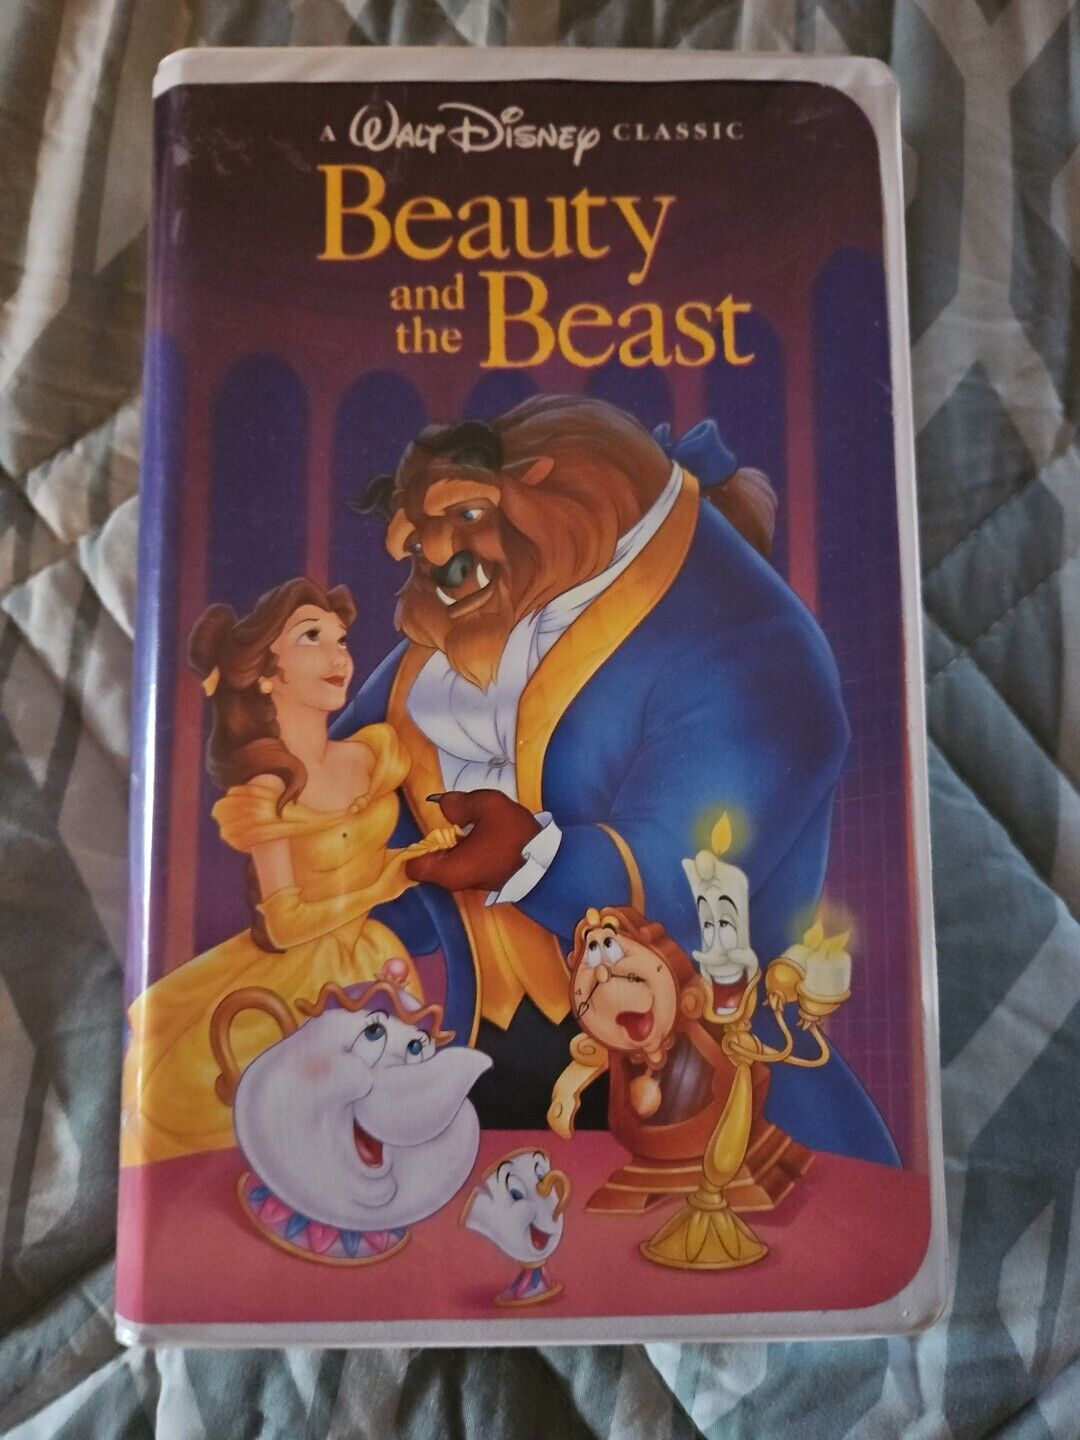 Own The Original Beauty And The Beast (VHS Tape,1992) Black Diamond Collectible 